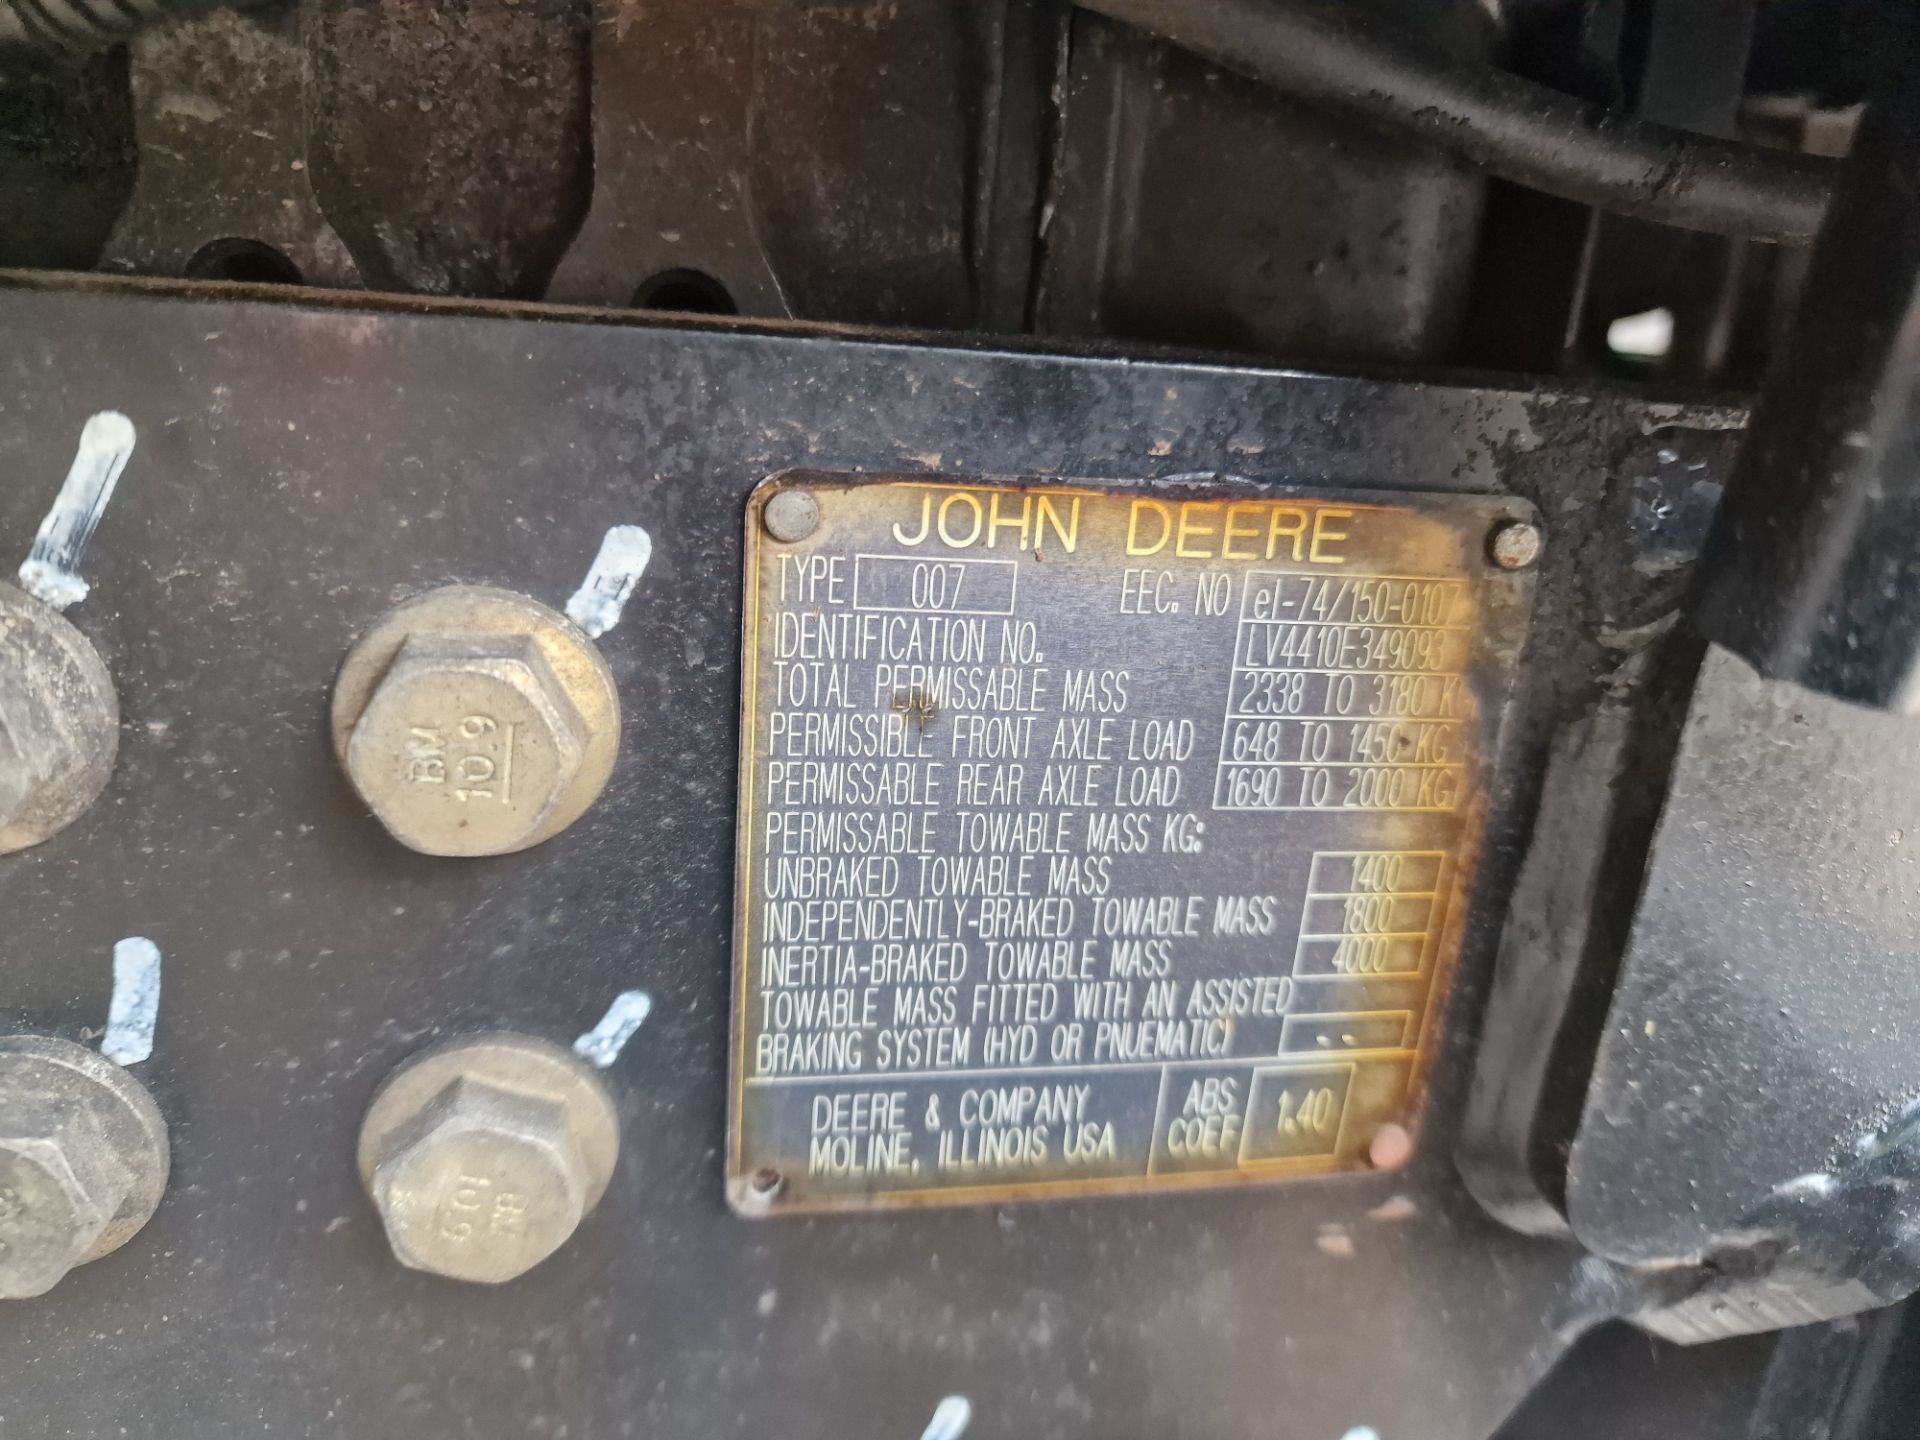 JOHN DEERE 4410 35HP TRACTOR 5410HRS SHUTTLE BRAKES NEED ATTENTION, NO FRONT WNDSCREEN - Image 18 of 18